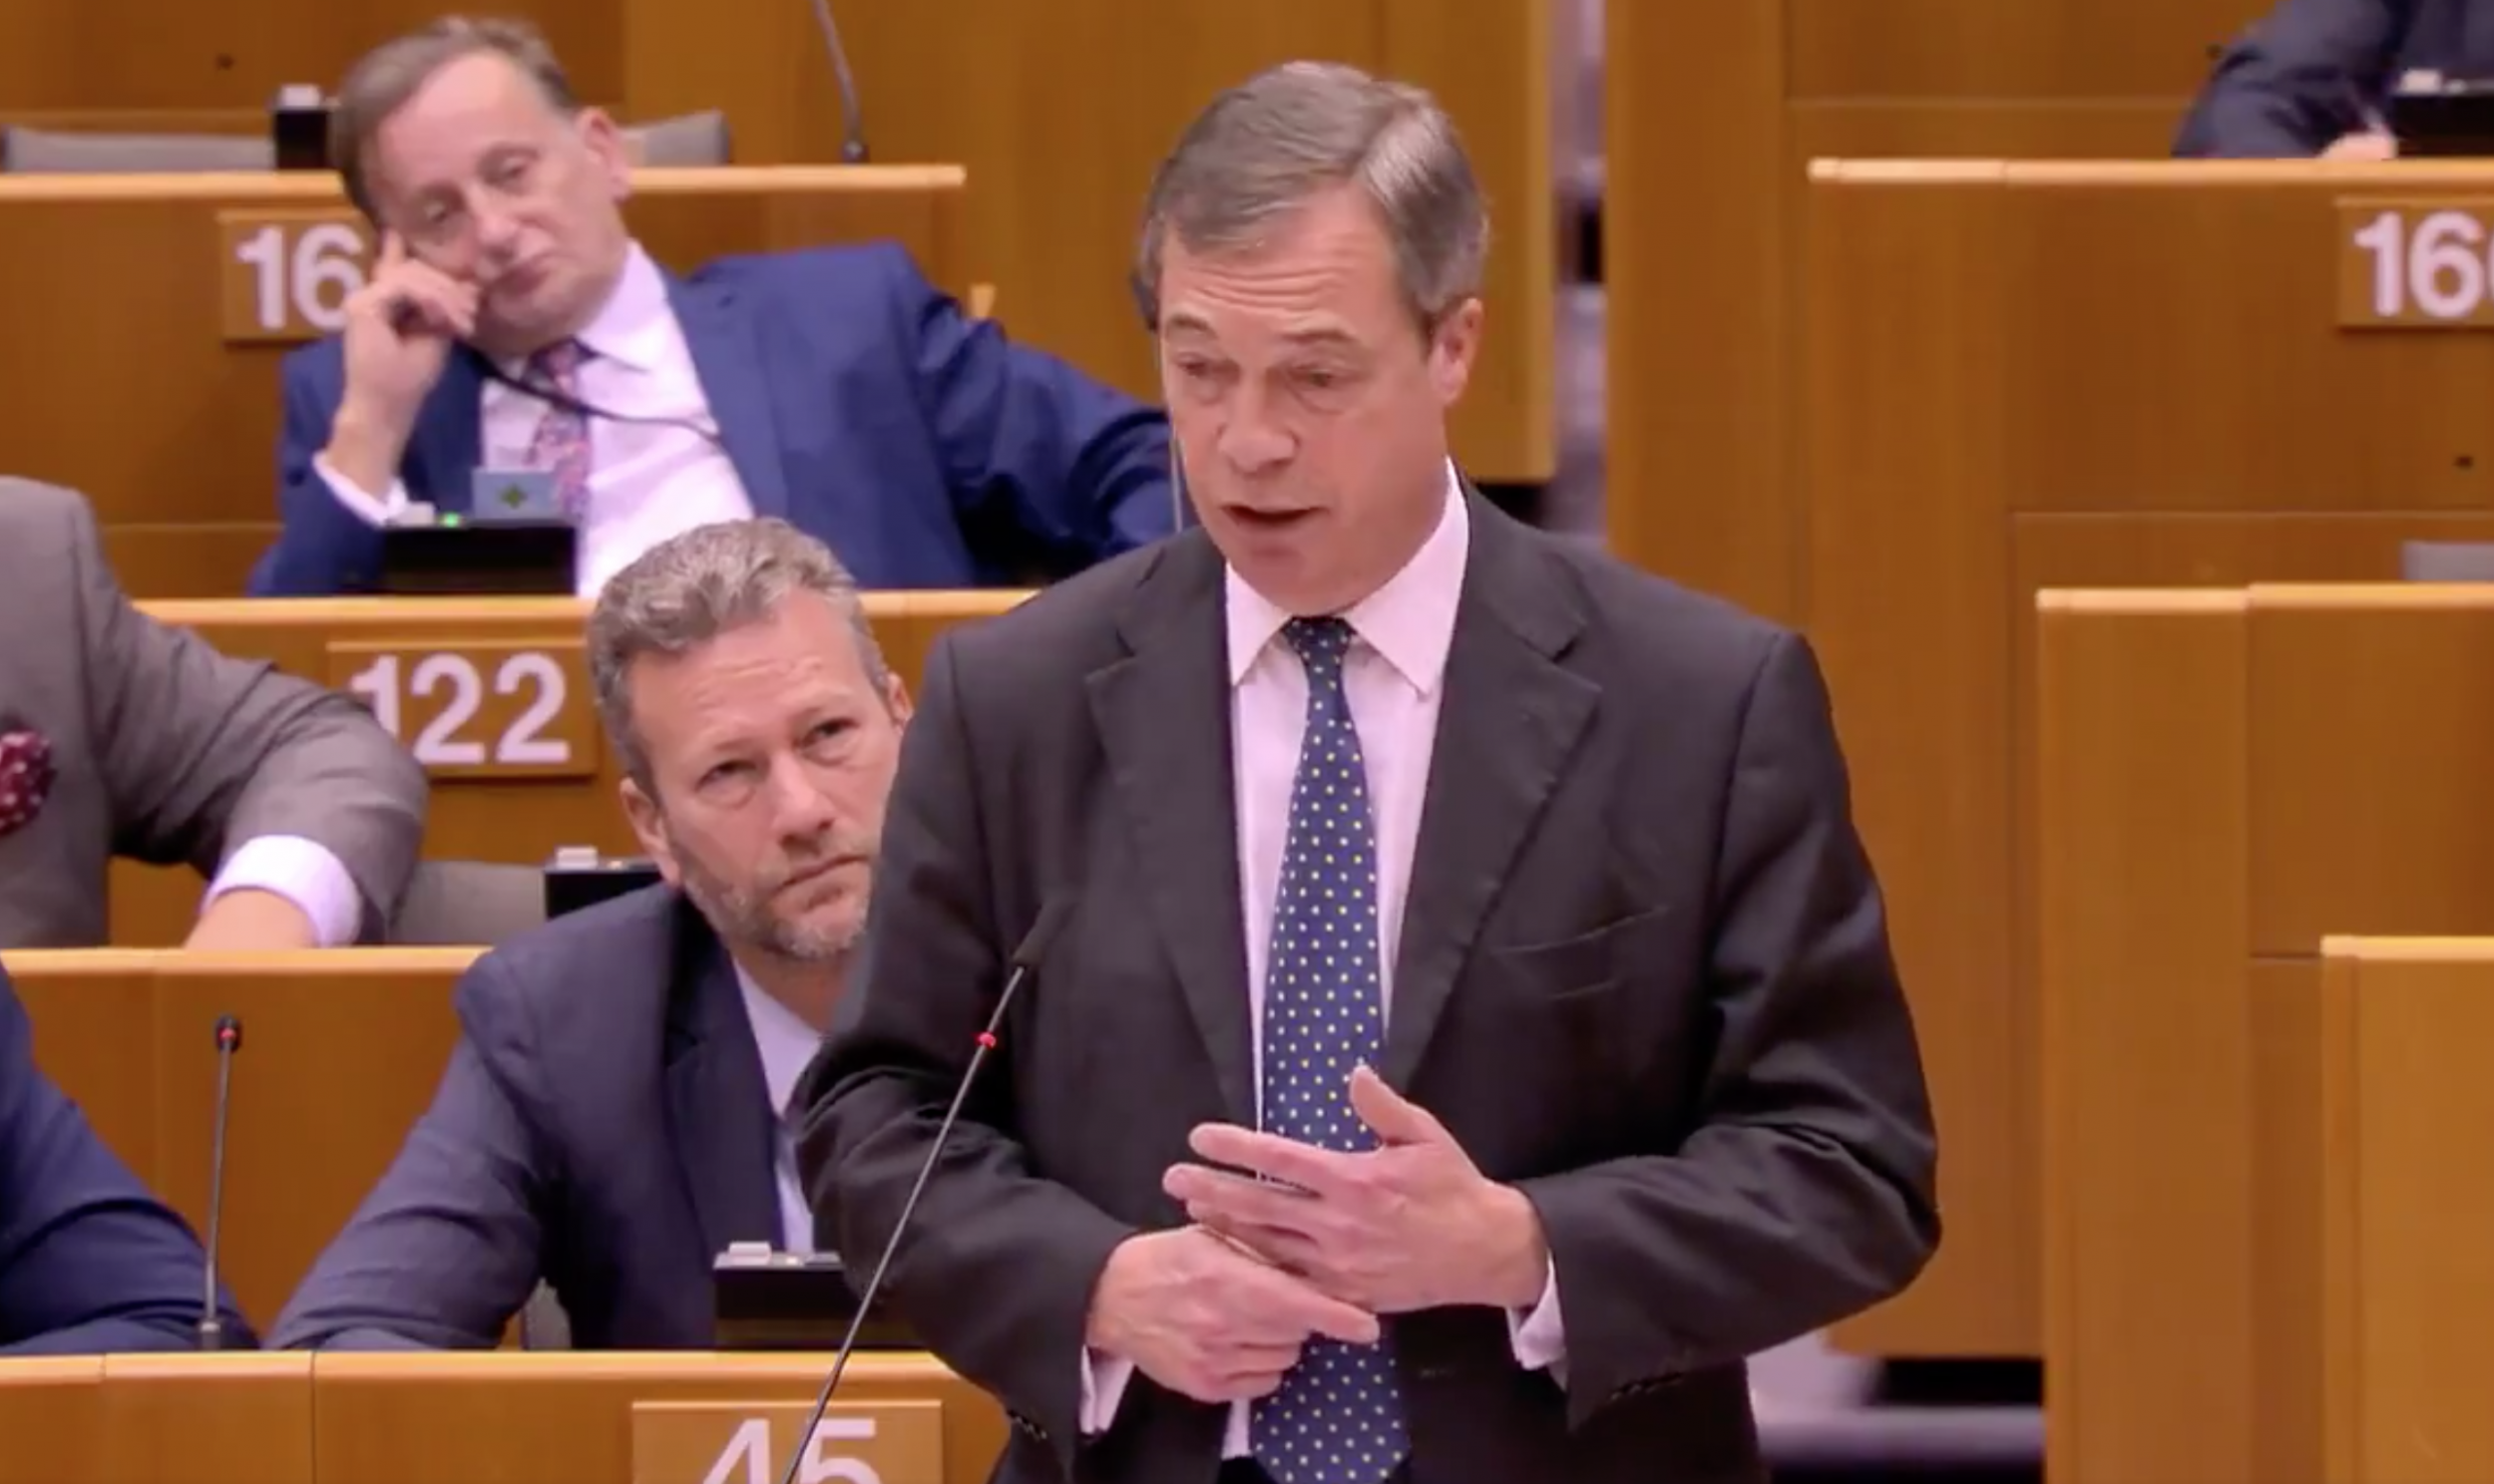 Nigel Farage said negotiations were ‘game, set, and match’ to Michel Barnier